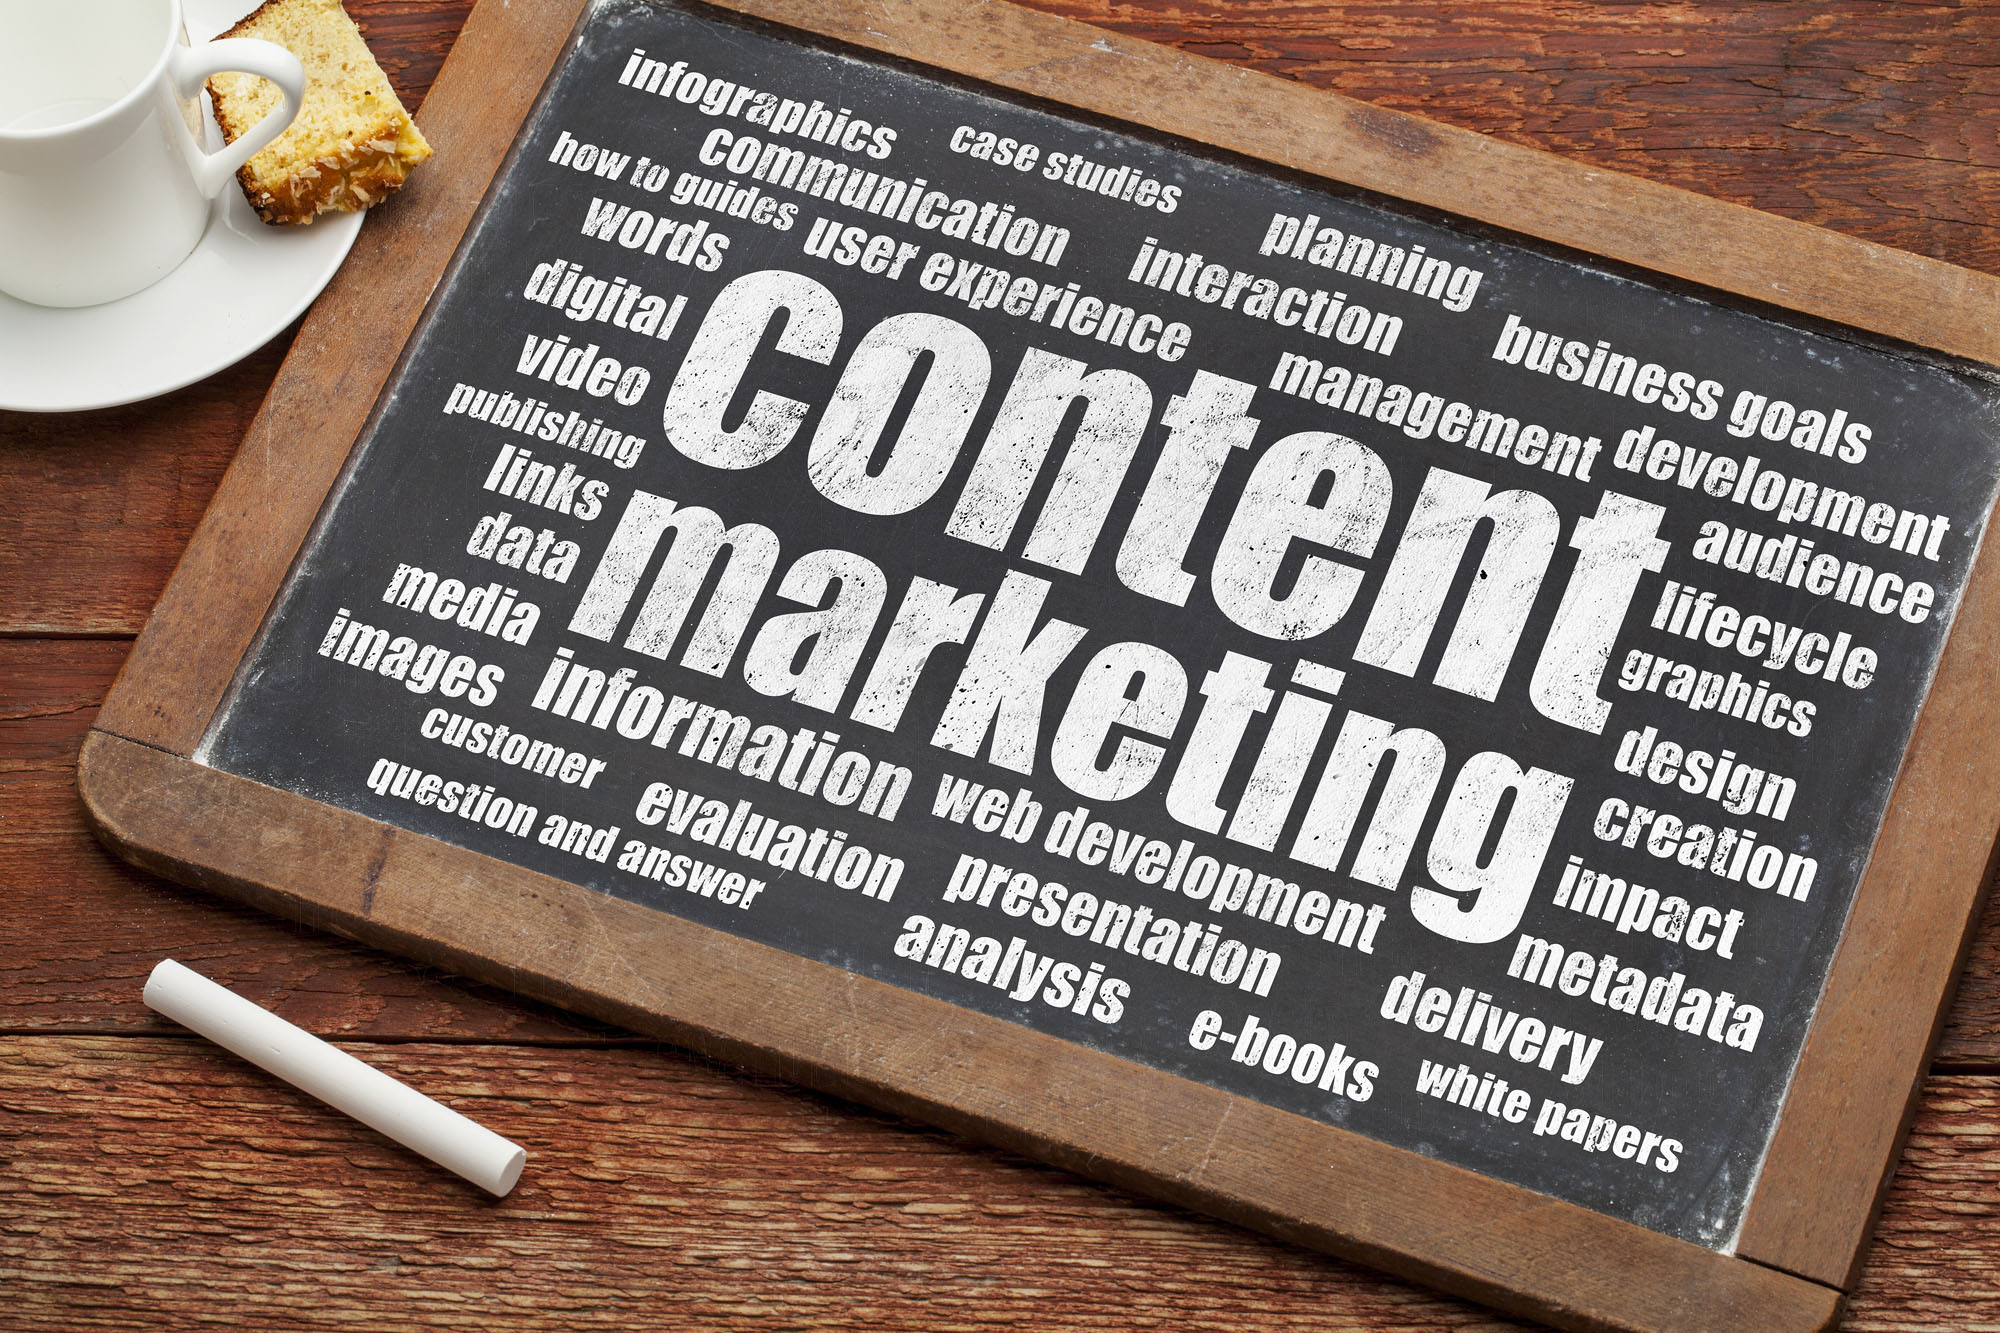 Why is Content Marketing Important for Your Business?